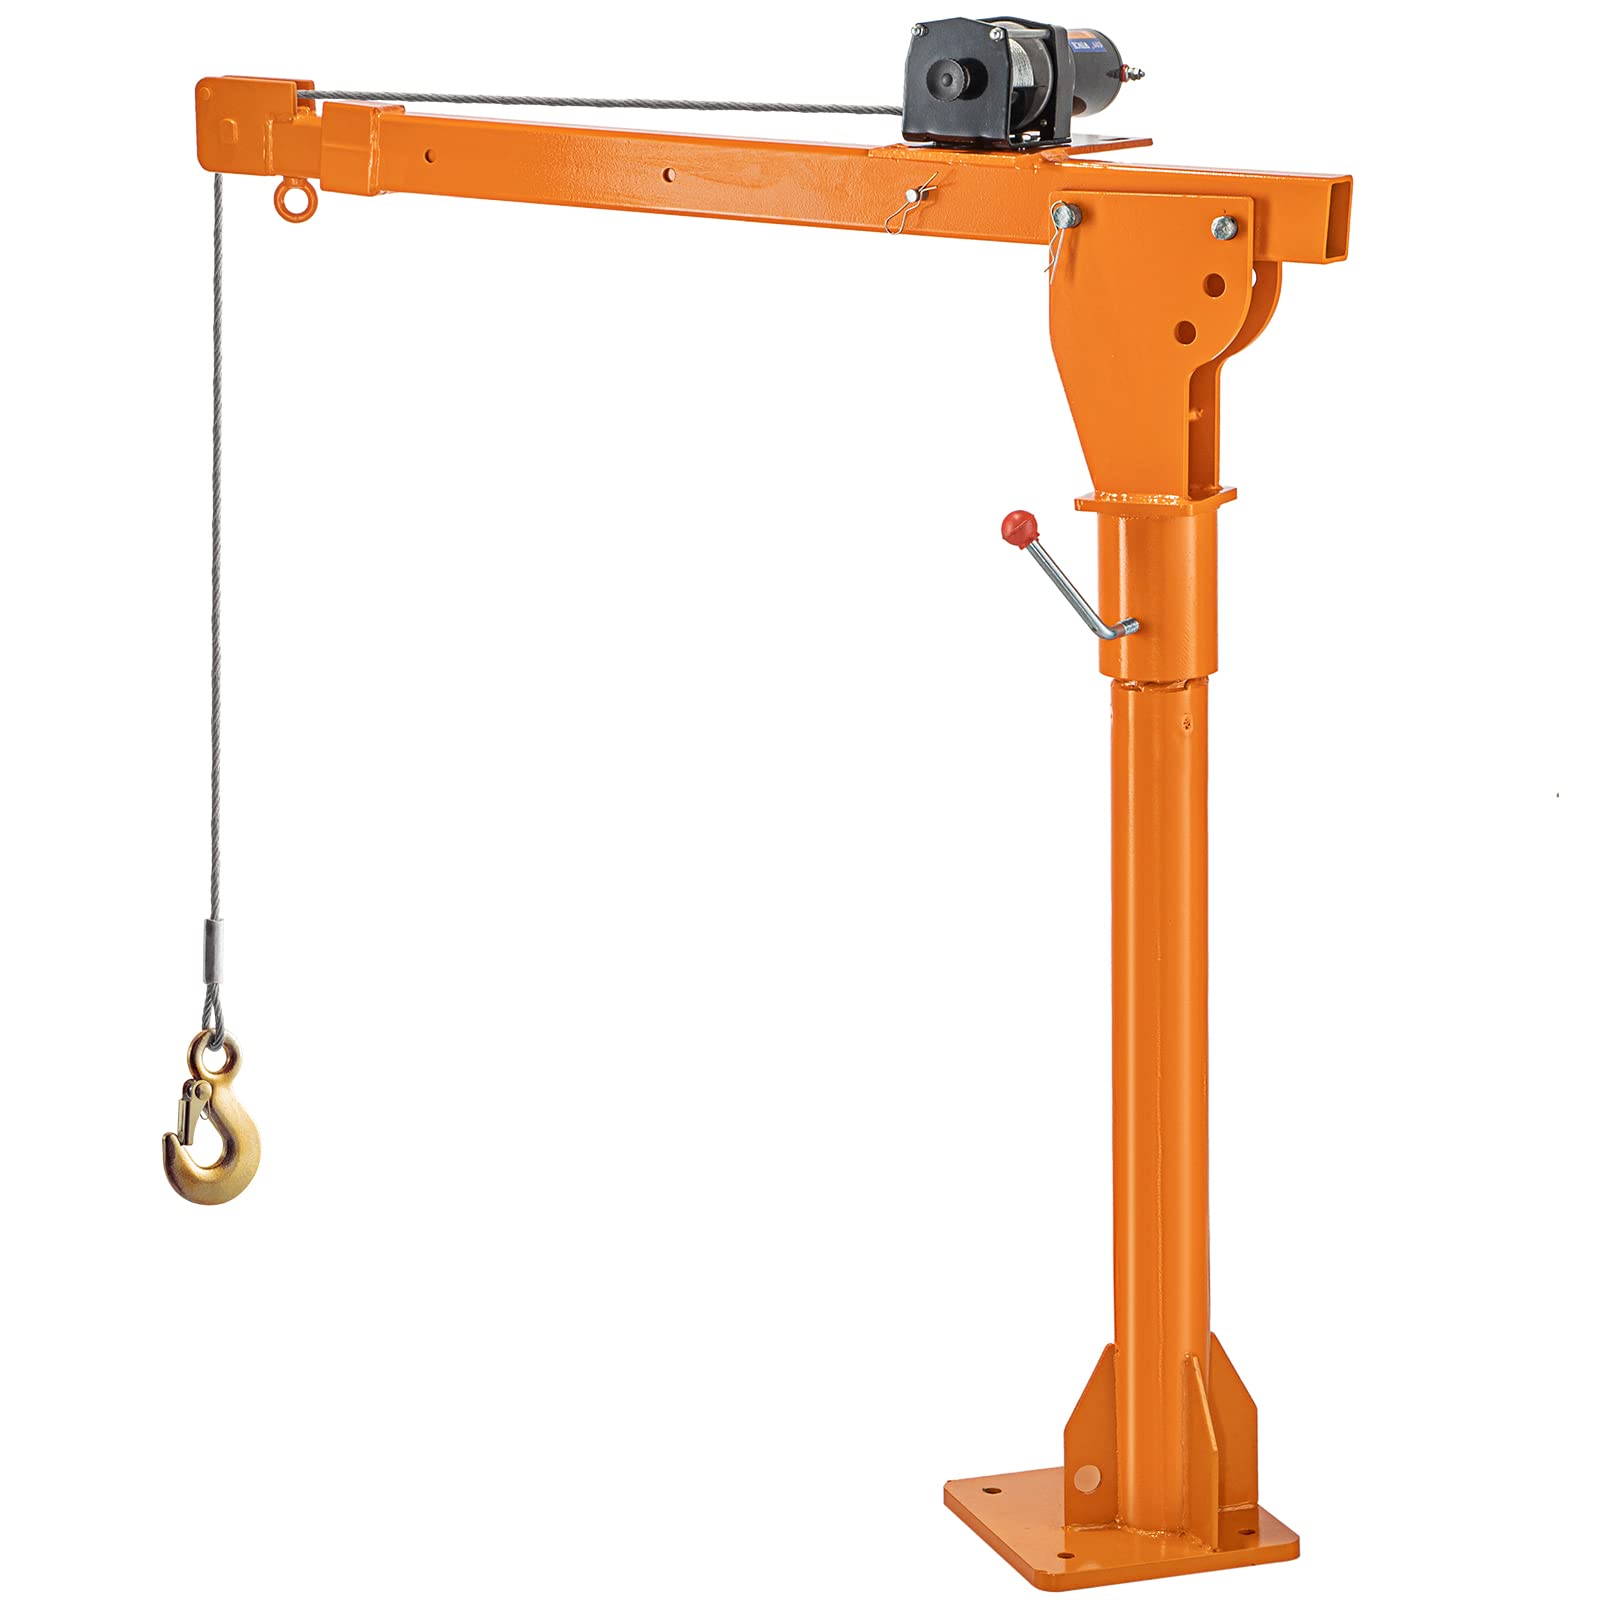 VEVOR Davit Crane, 2200 lbs Truck Crane, Wireless Remote Control Dock Crane, 12V 360° Swivel Electric Crane for Truck, Crane Hitch for Lifting Goods in Construction, Forestry, Factory, and Transport